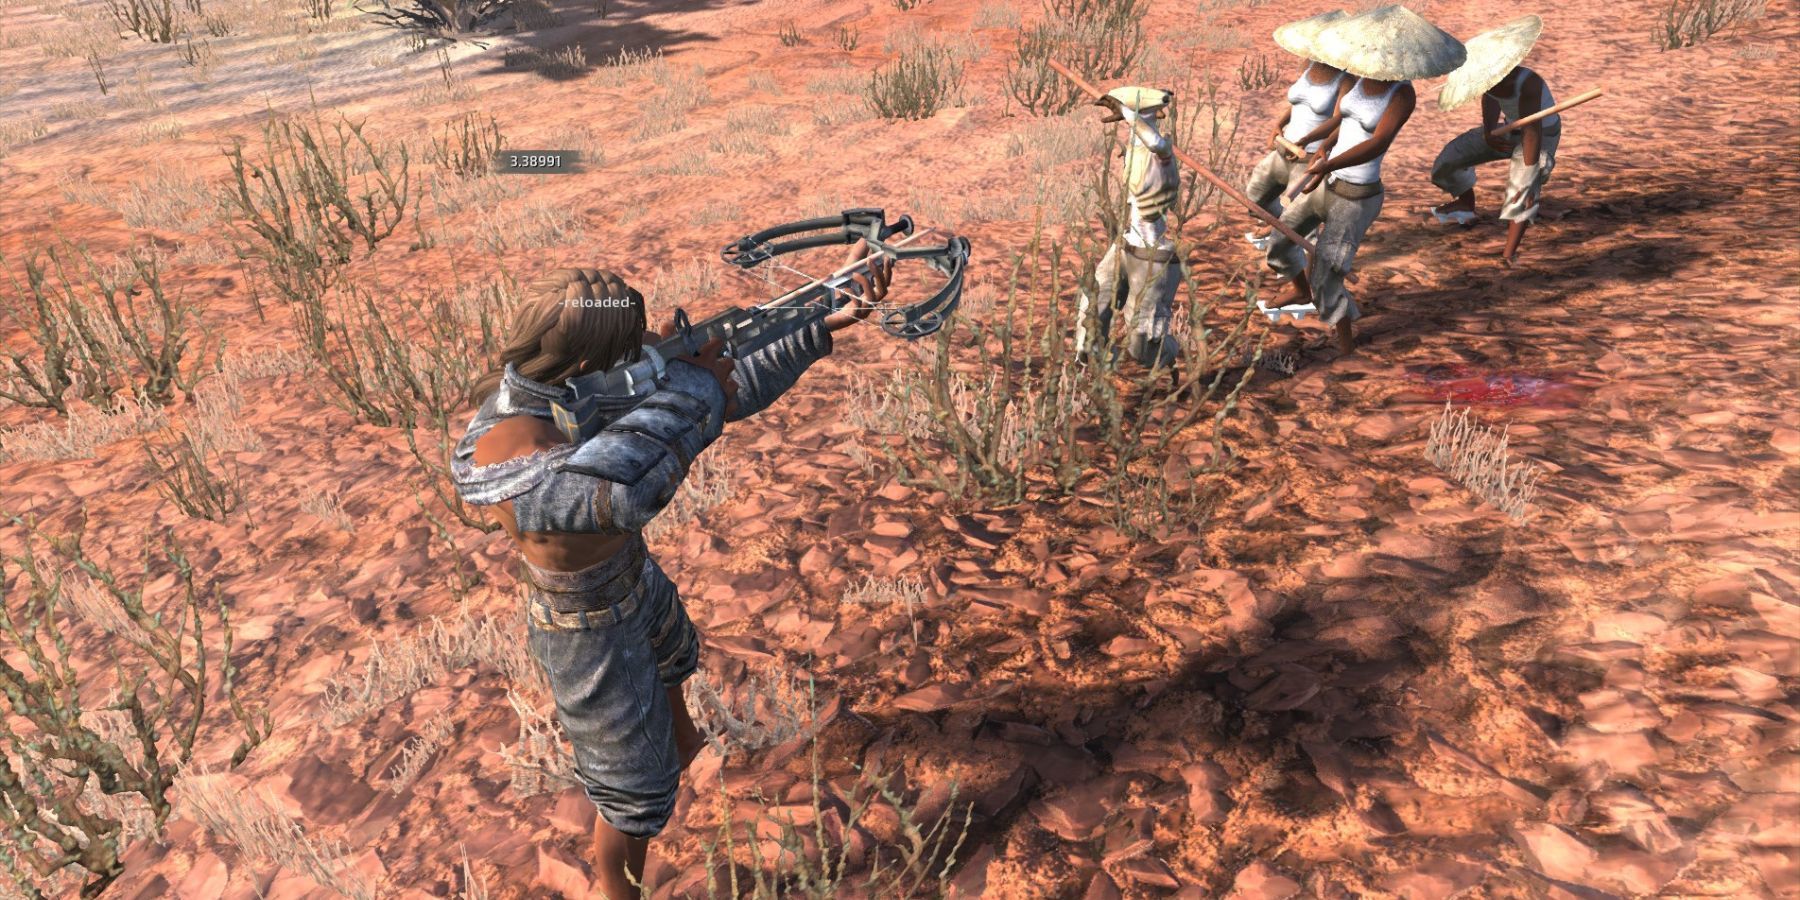 kenshi player holding a crossbow